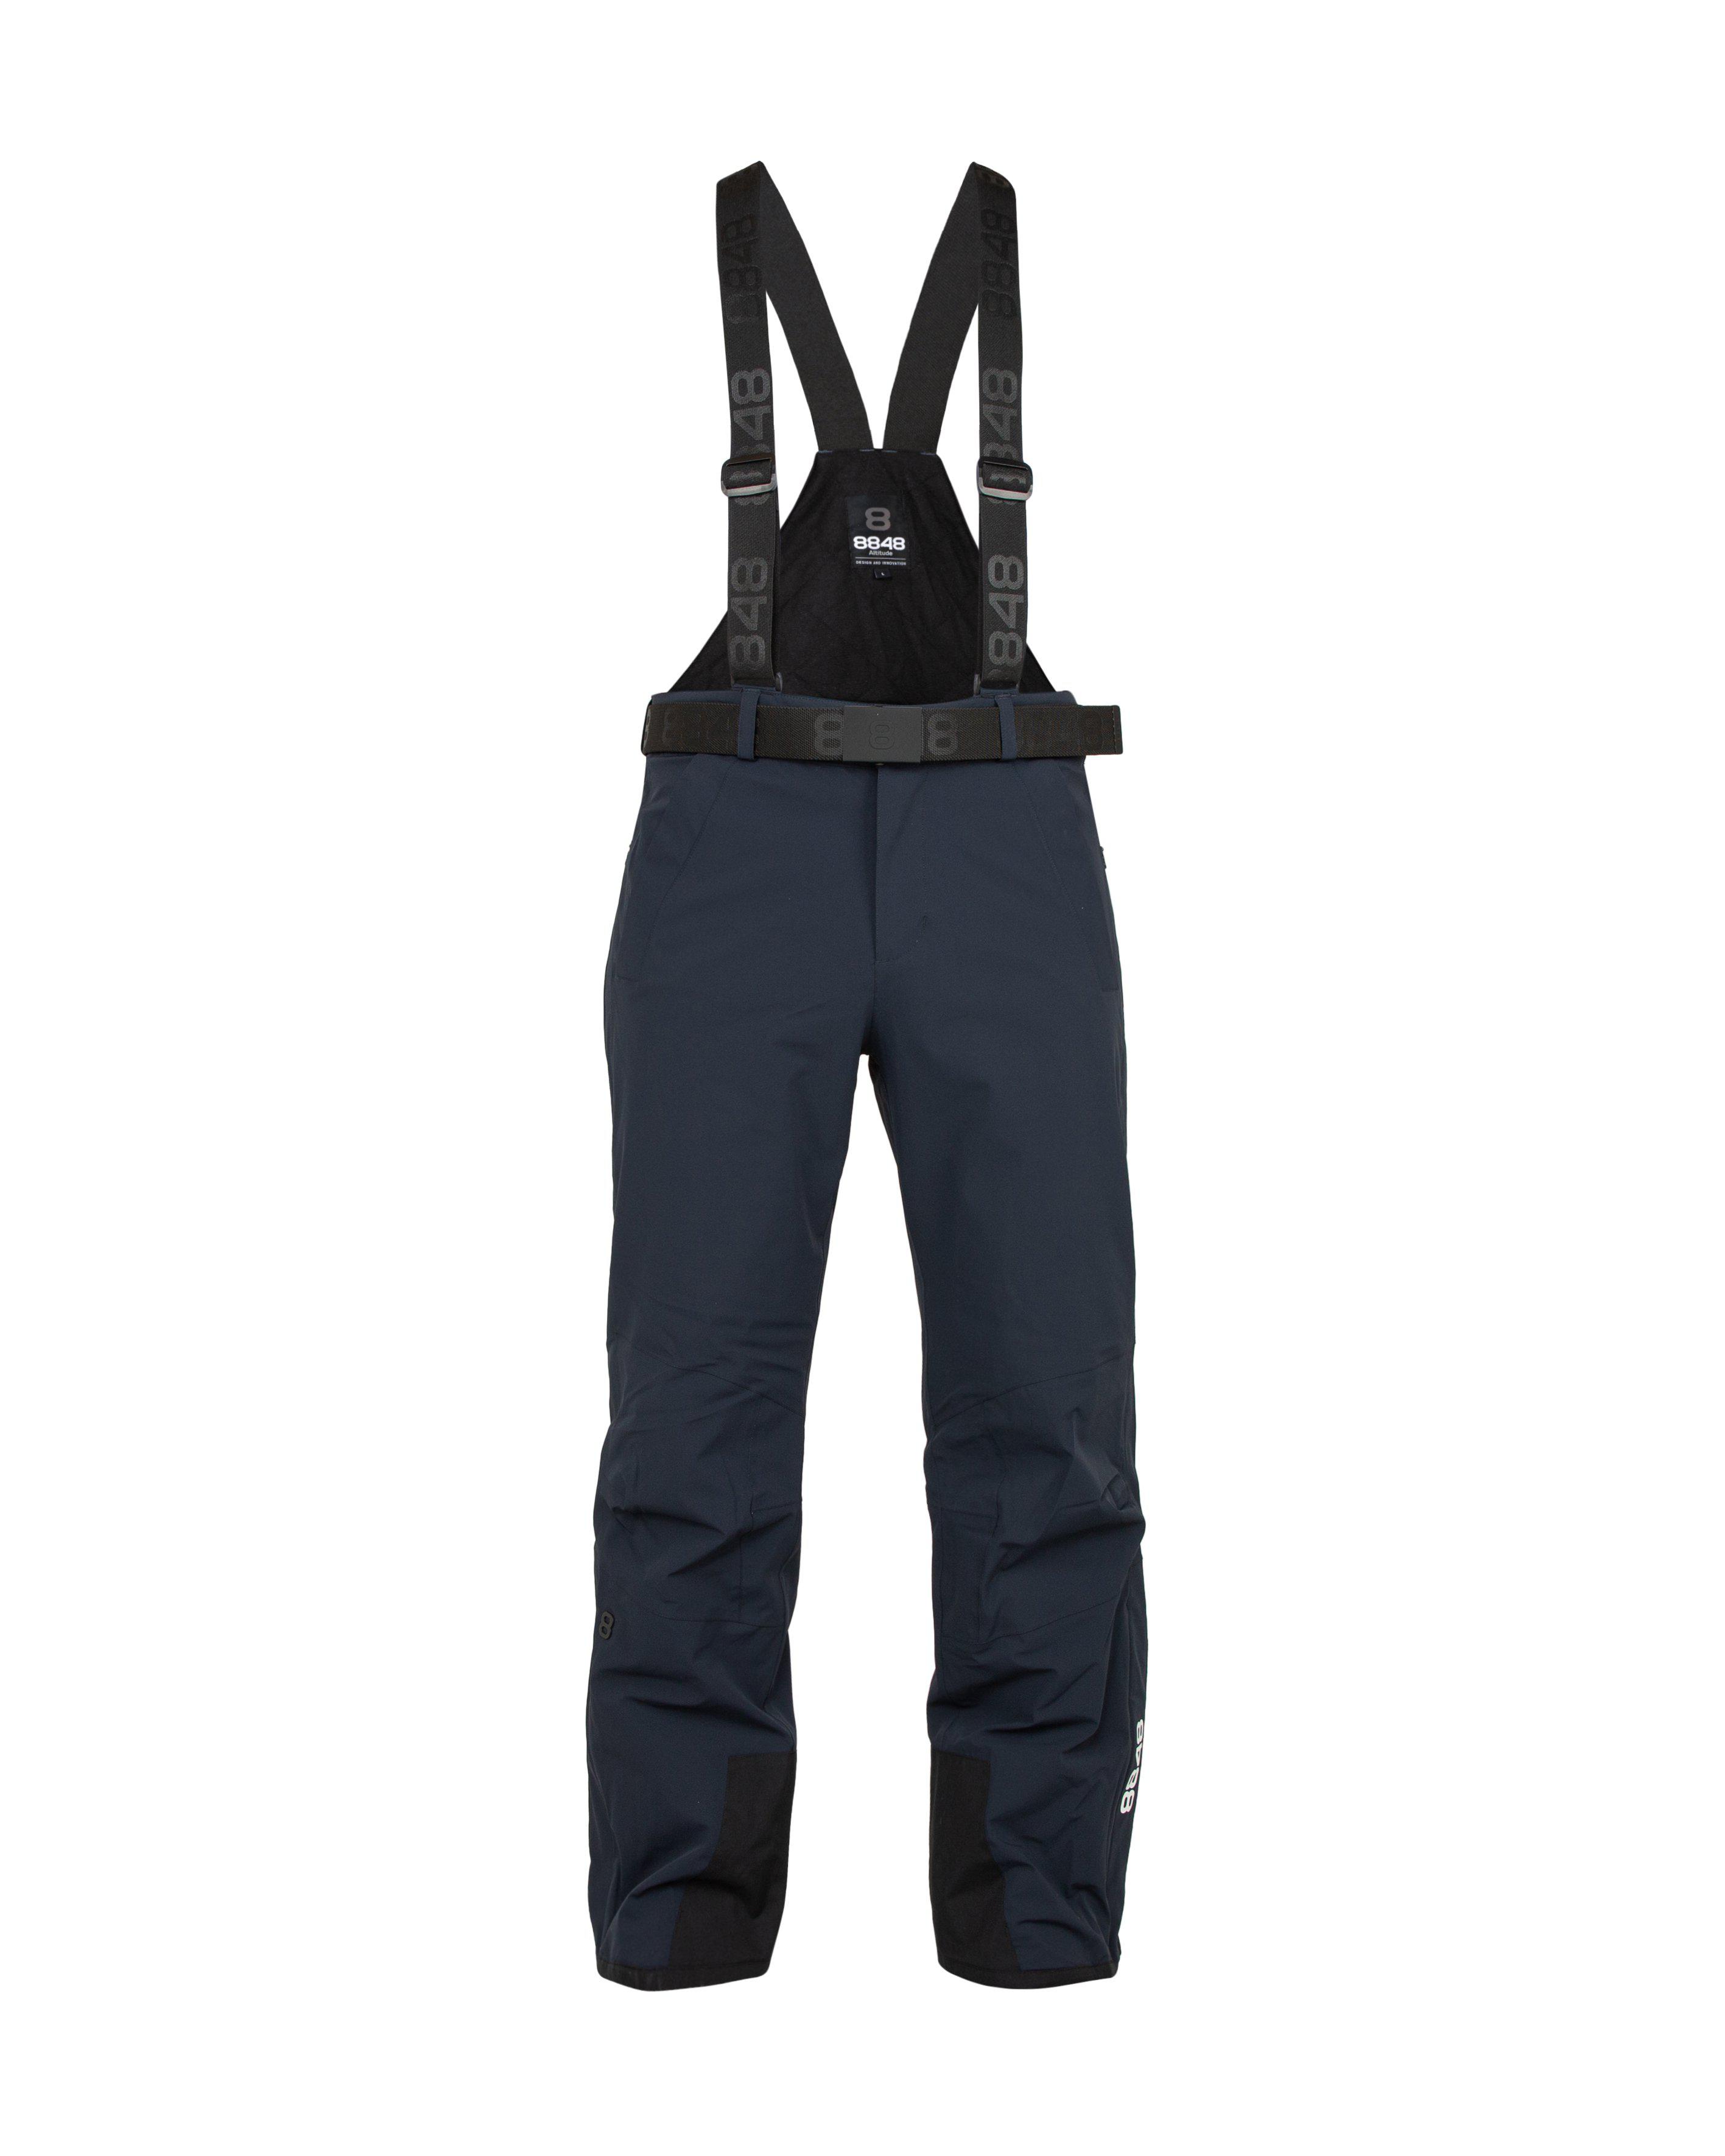 8848 Altitude Force Pant